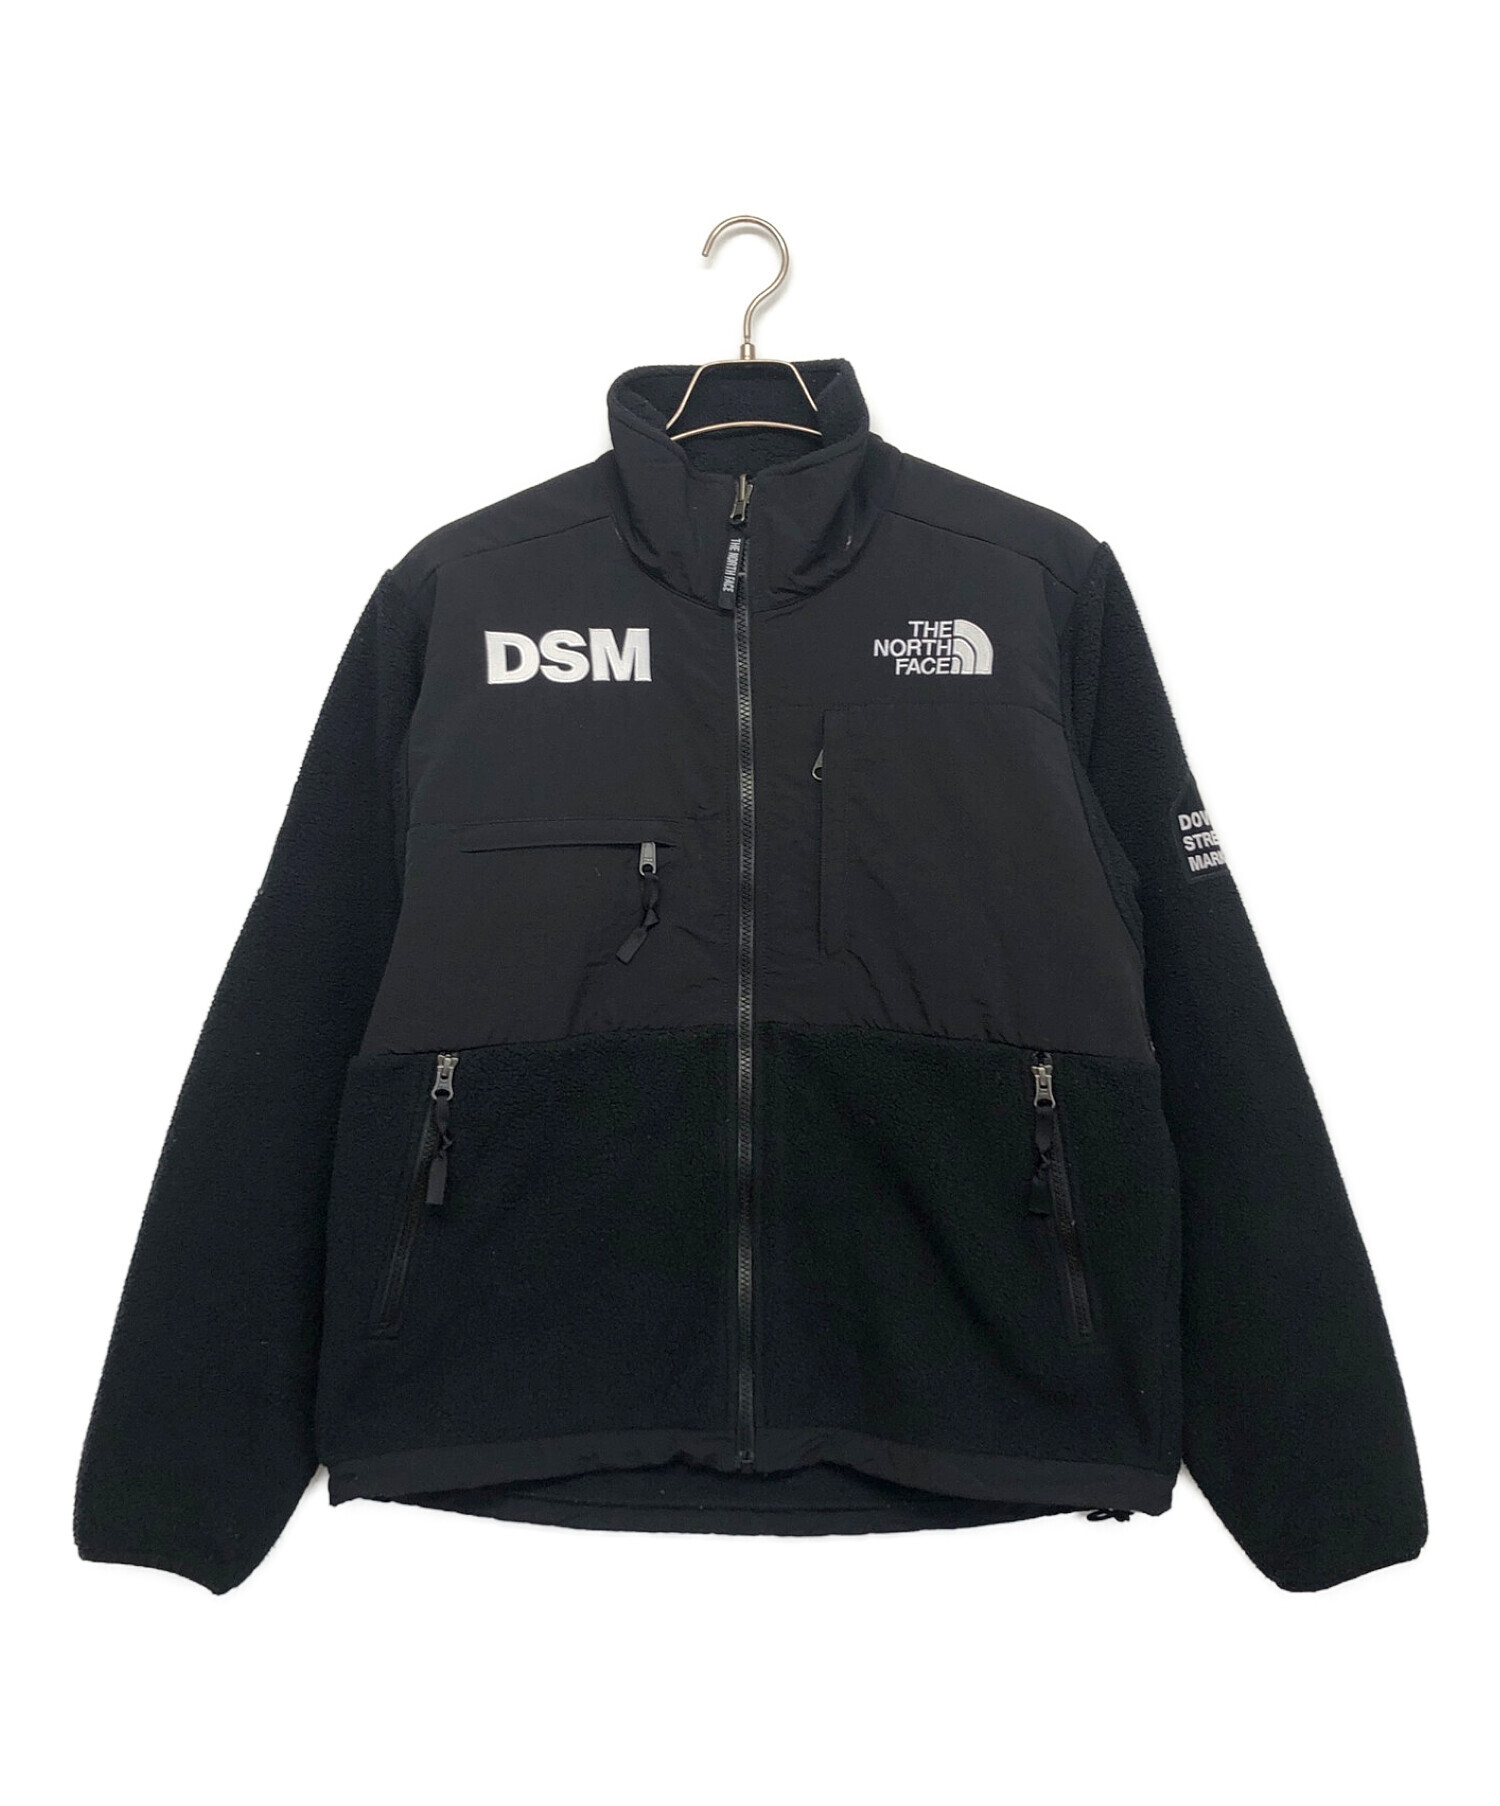 THE NORTH FACE ジップブルゾン